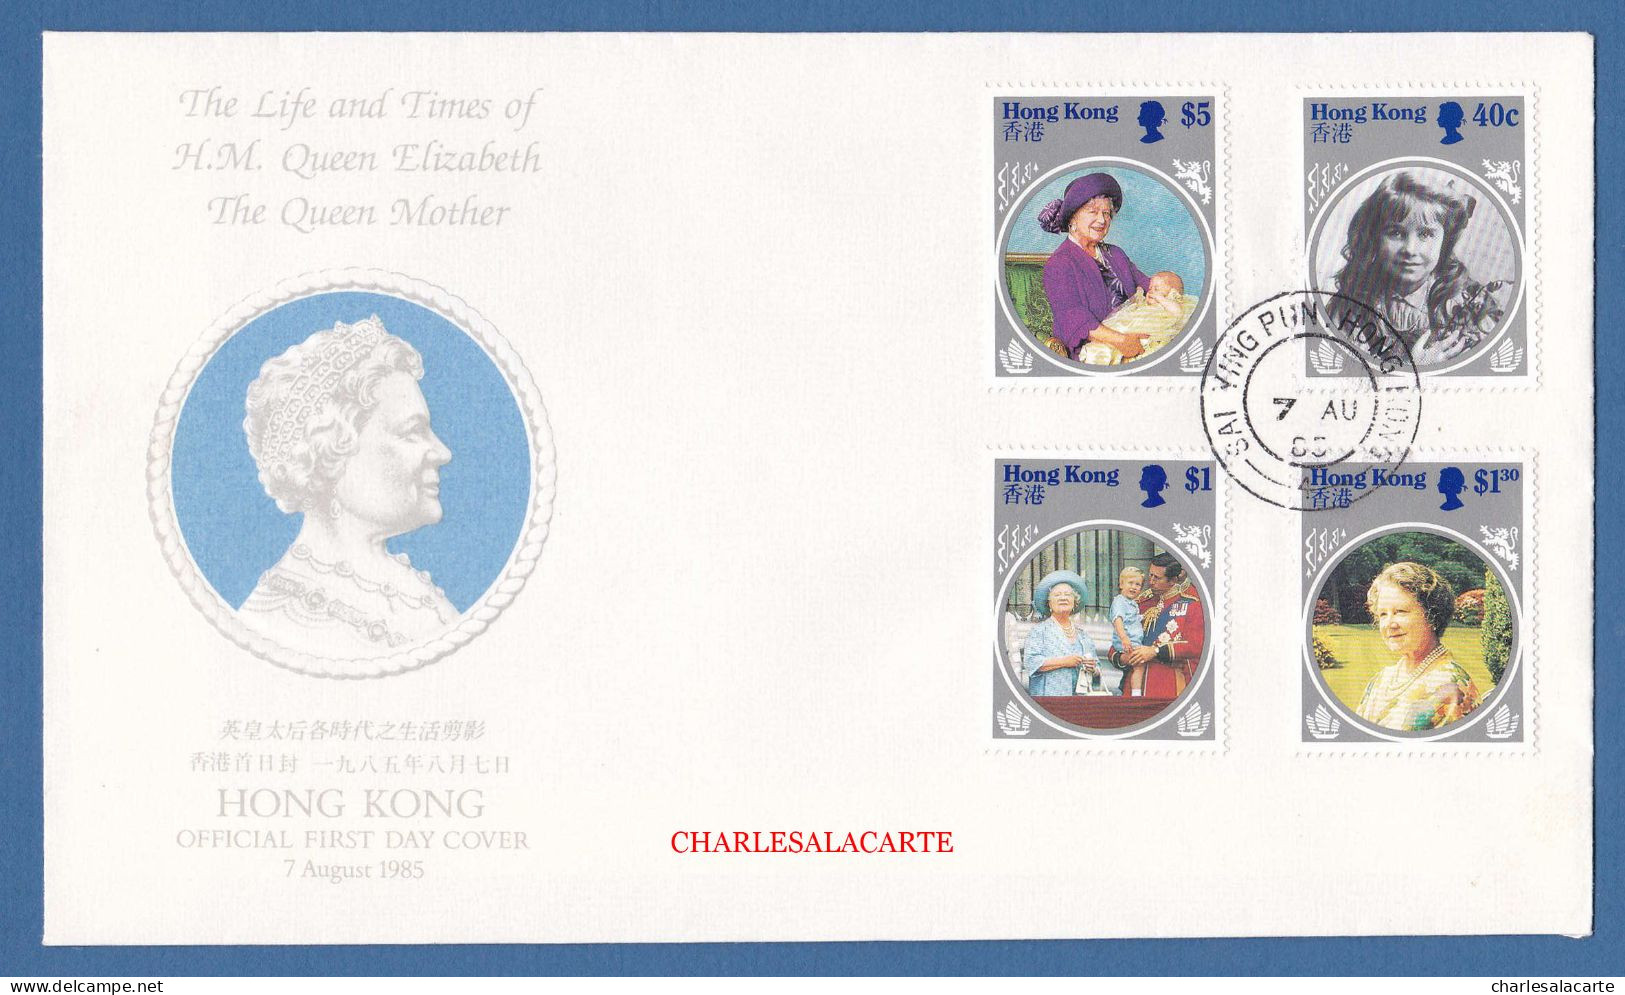 HONG KONG 1985  LIFE & TIMES OF QUEEN MOTHER  S.G. 493-496  F.D.C. - Covers & Documents